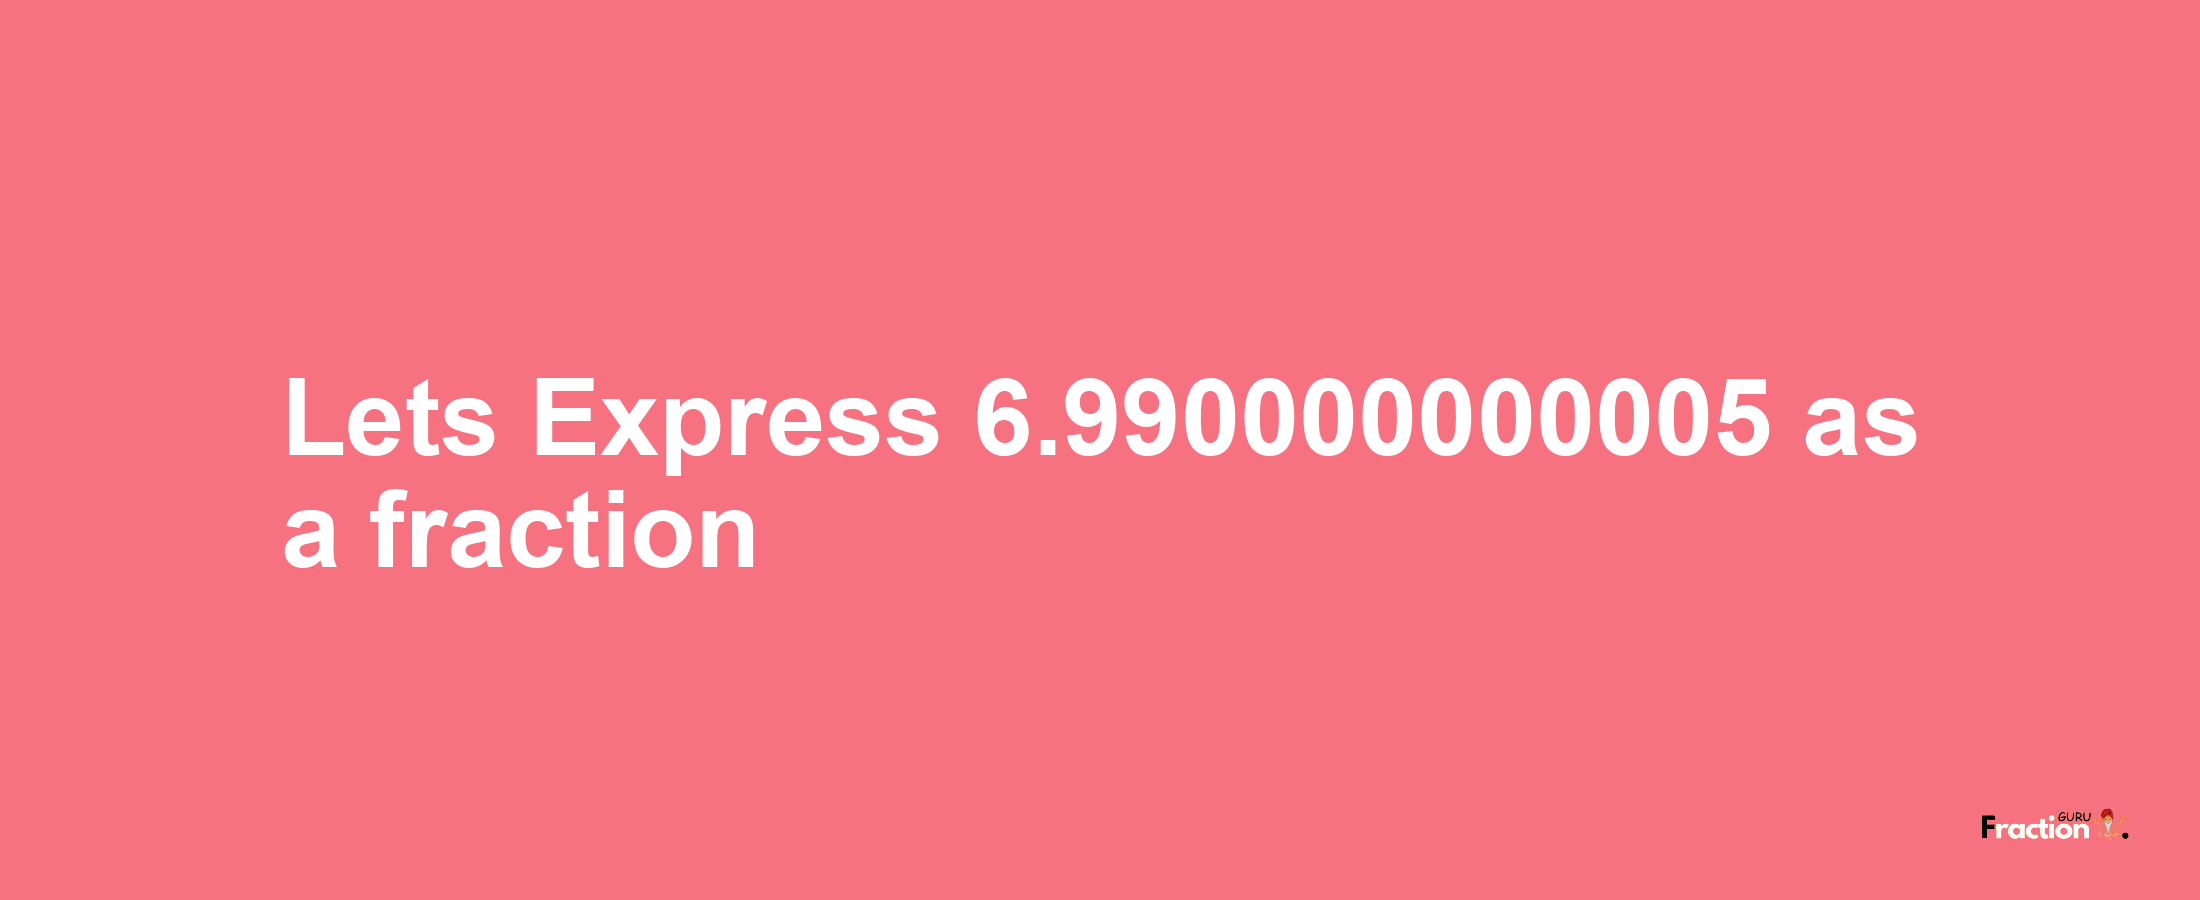 Lets Express 6.990000000005 as afraction